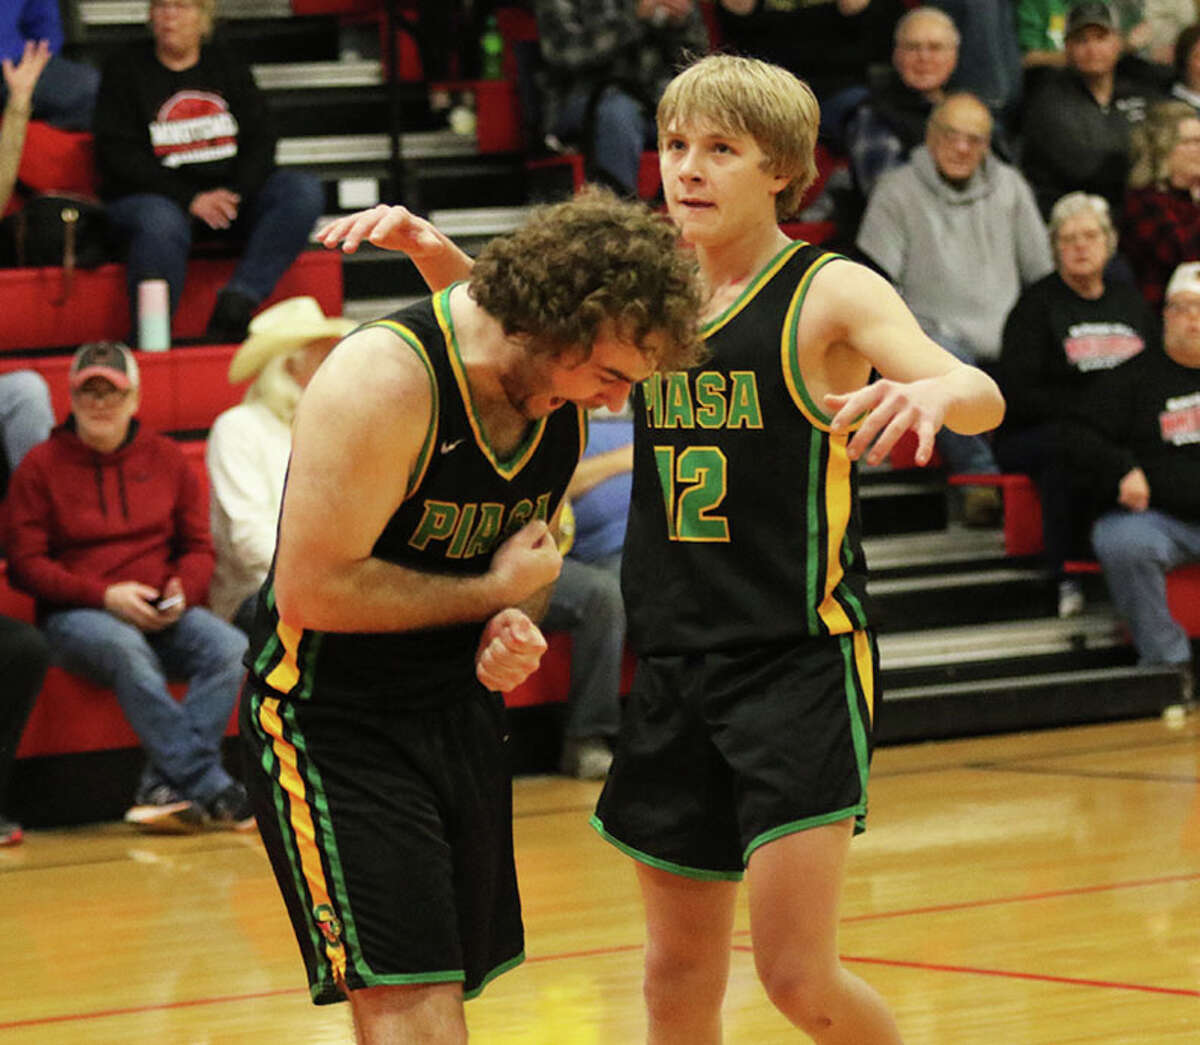 Southwestern's Hank Bouillon (left) reacts after making the first of two free throws with 0.8 seconds left in OT while teammate Rocky Darr looks at the clock on Friday night in the championship game of the 104th Macoupin County Touranament at Hlafka Hall in Bunker Hill.